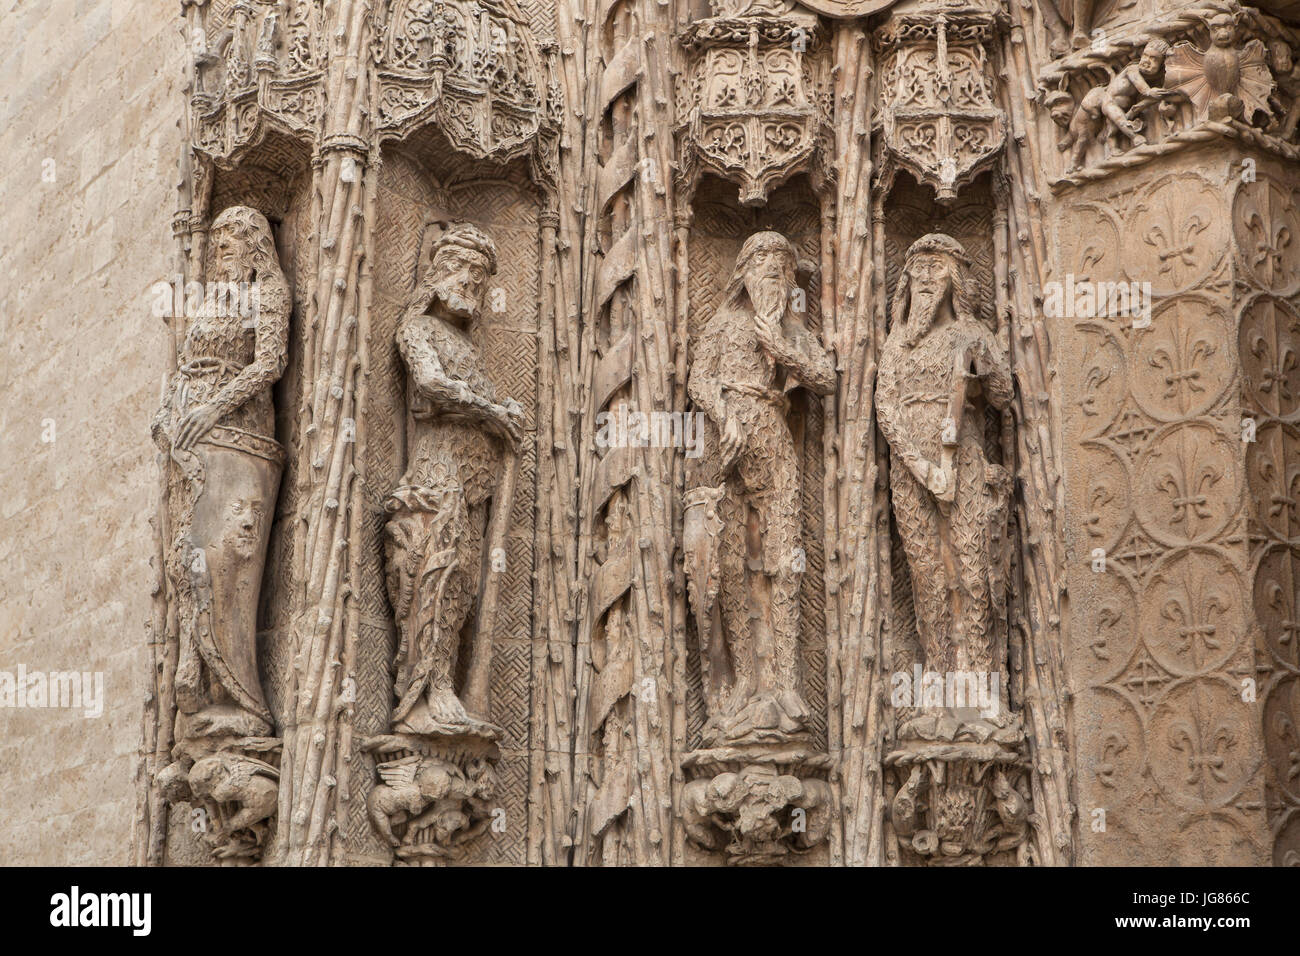 Savage men depicted on the main facade of the Colegio de San Gregorio in Isabelline style, now housing the National Museum of Sculpture (Museo Nacional de Escultura) in Valladolid in Castile and León, Spain. Stock Photo